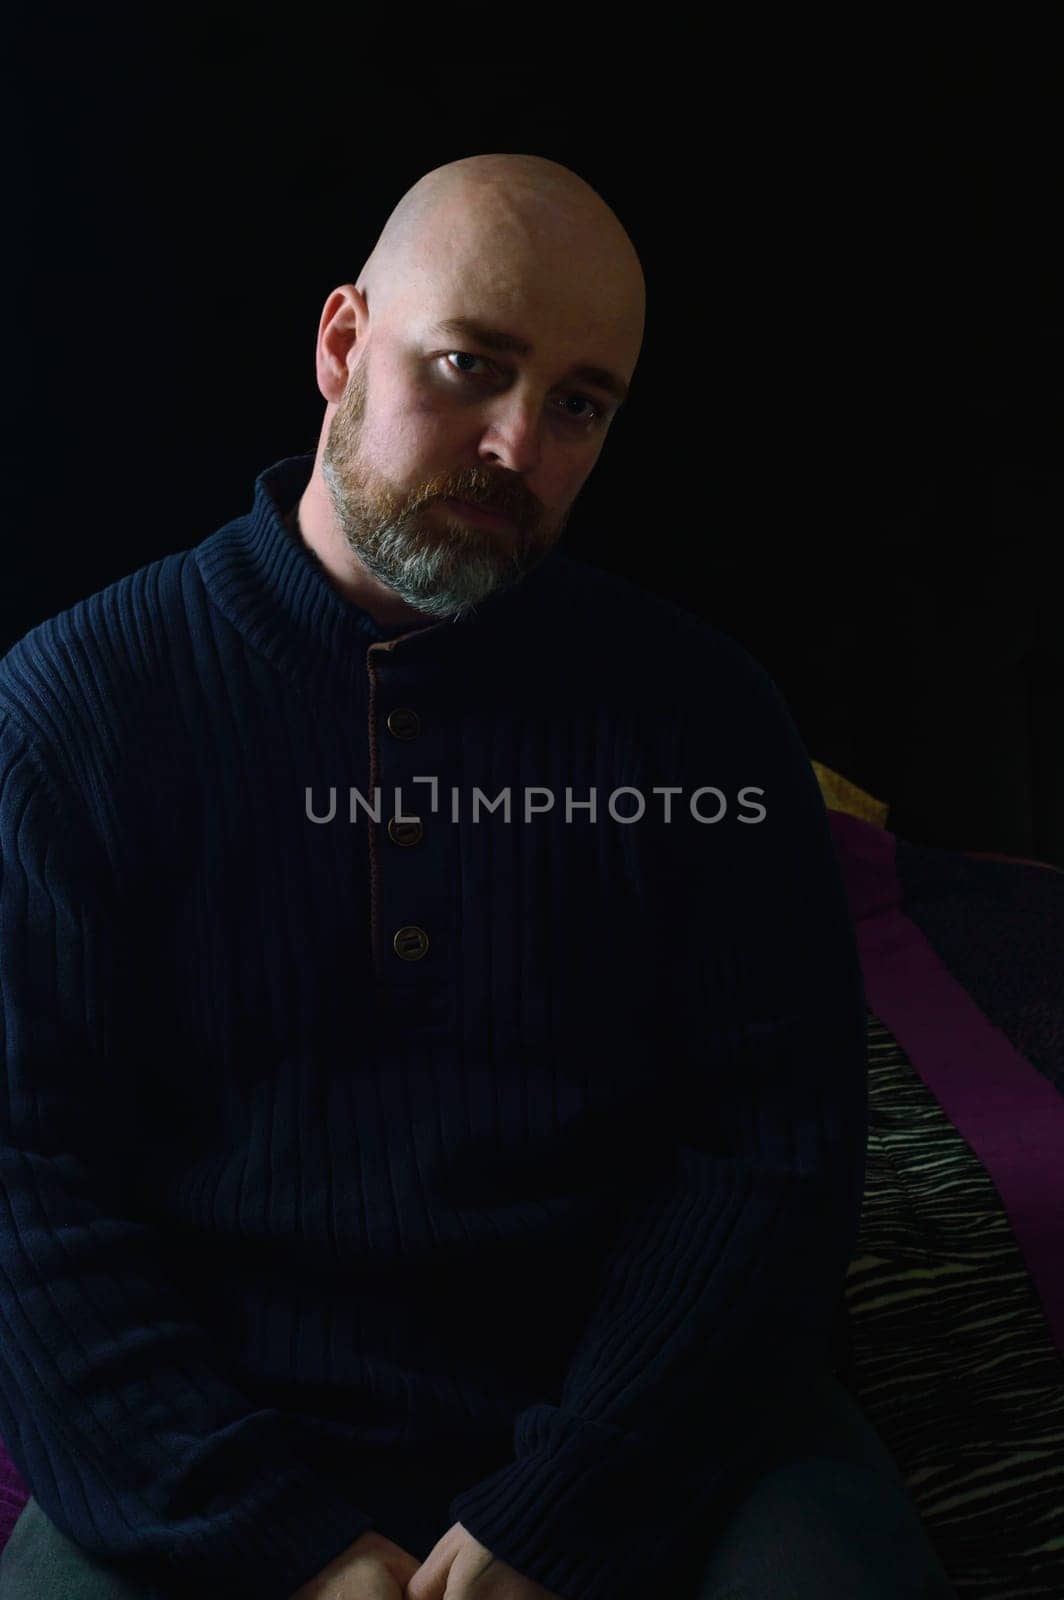 Well dressed caucasian male, late thirties, in dark clothes on dark background. Studio shot with side lighting, low key portrait